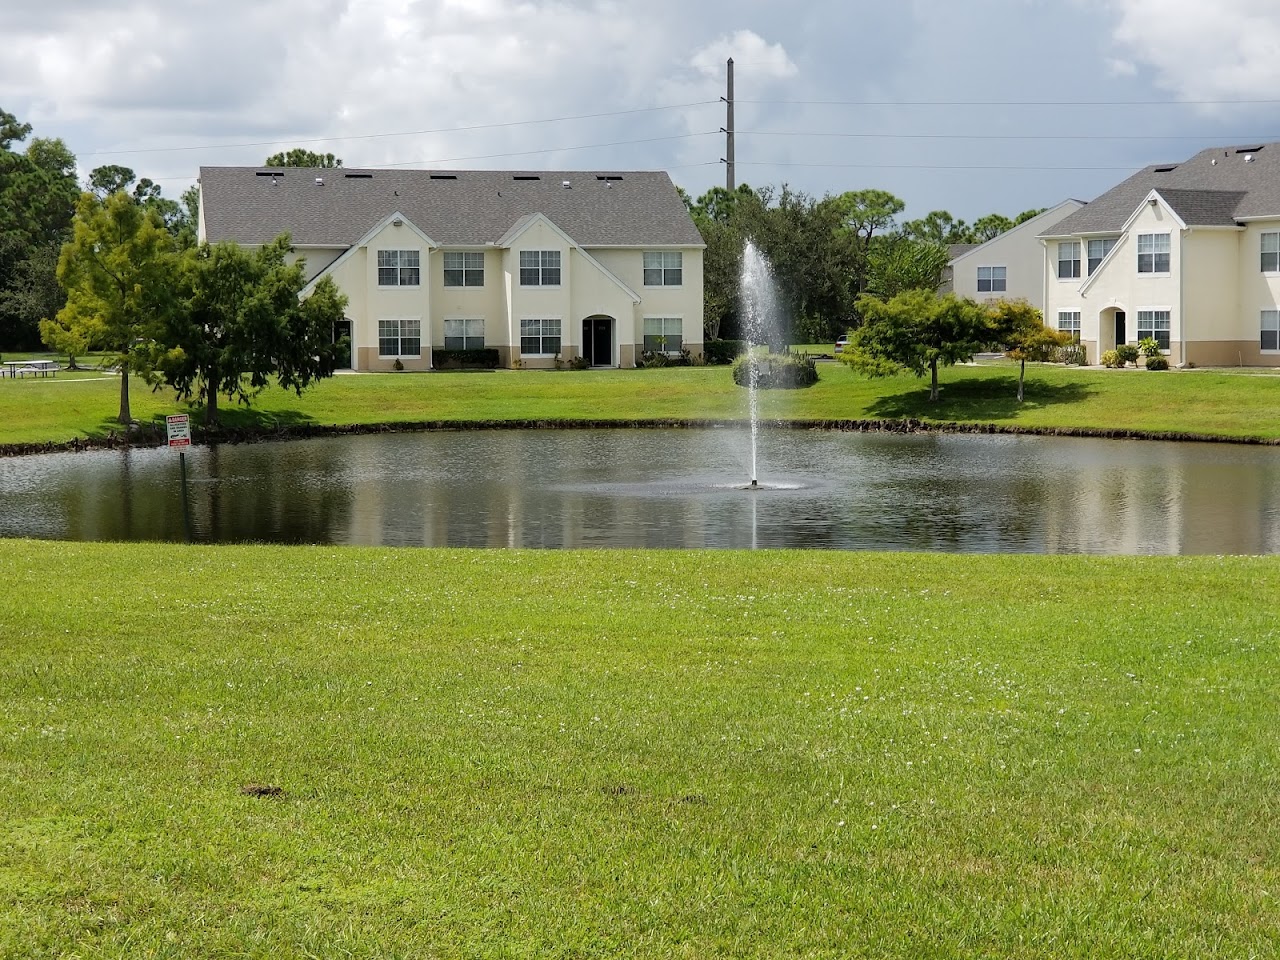 Photo of COVE AT ST LUCIE. Affordable housing located at 4400 NW COVE CIR PORT ST LUCIE, FL 34983